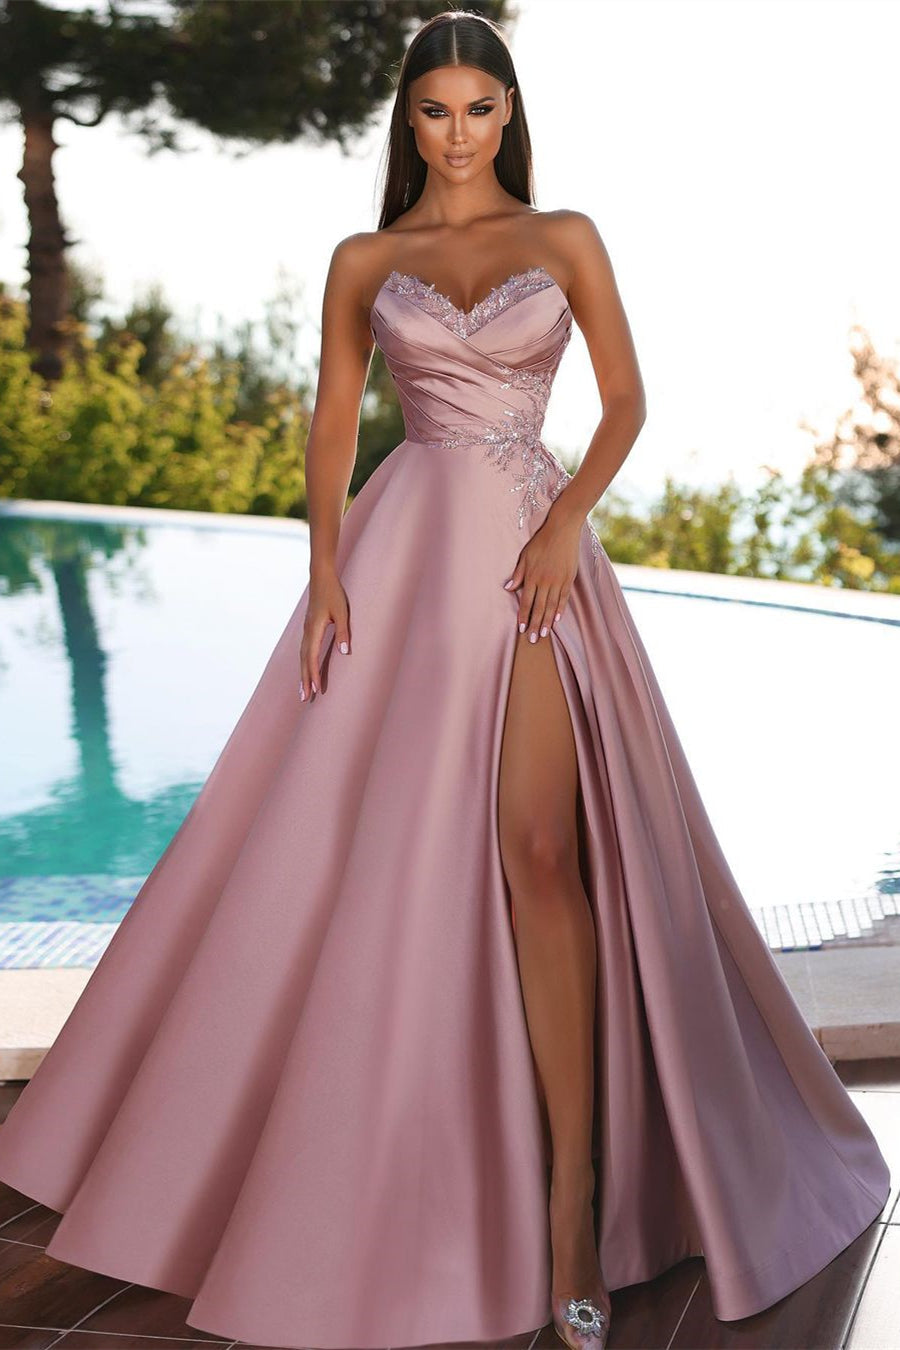 Dusty Rose sequin evening dress 2027E2933 by Terani Couture.